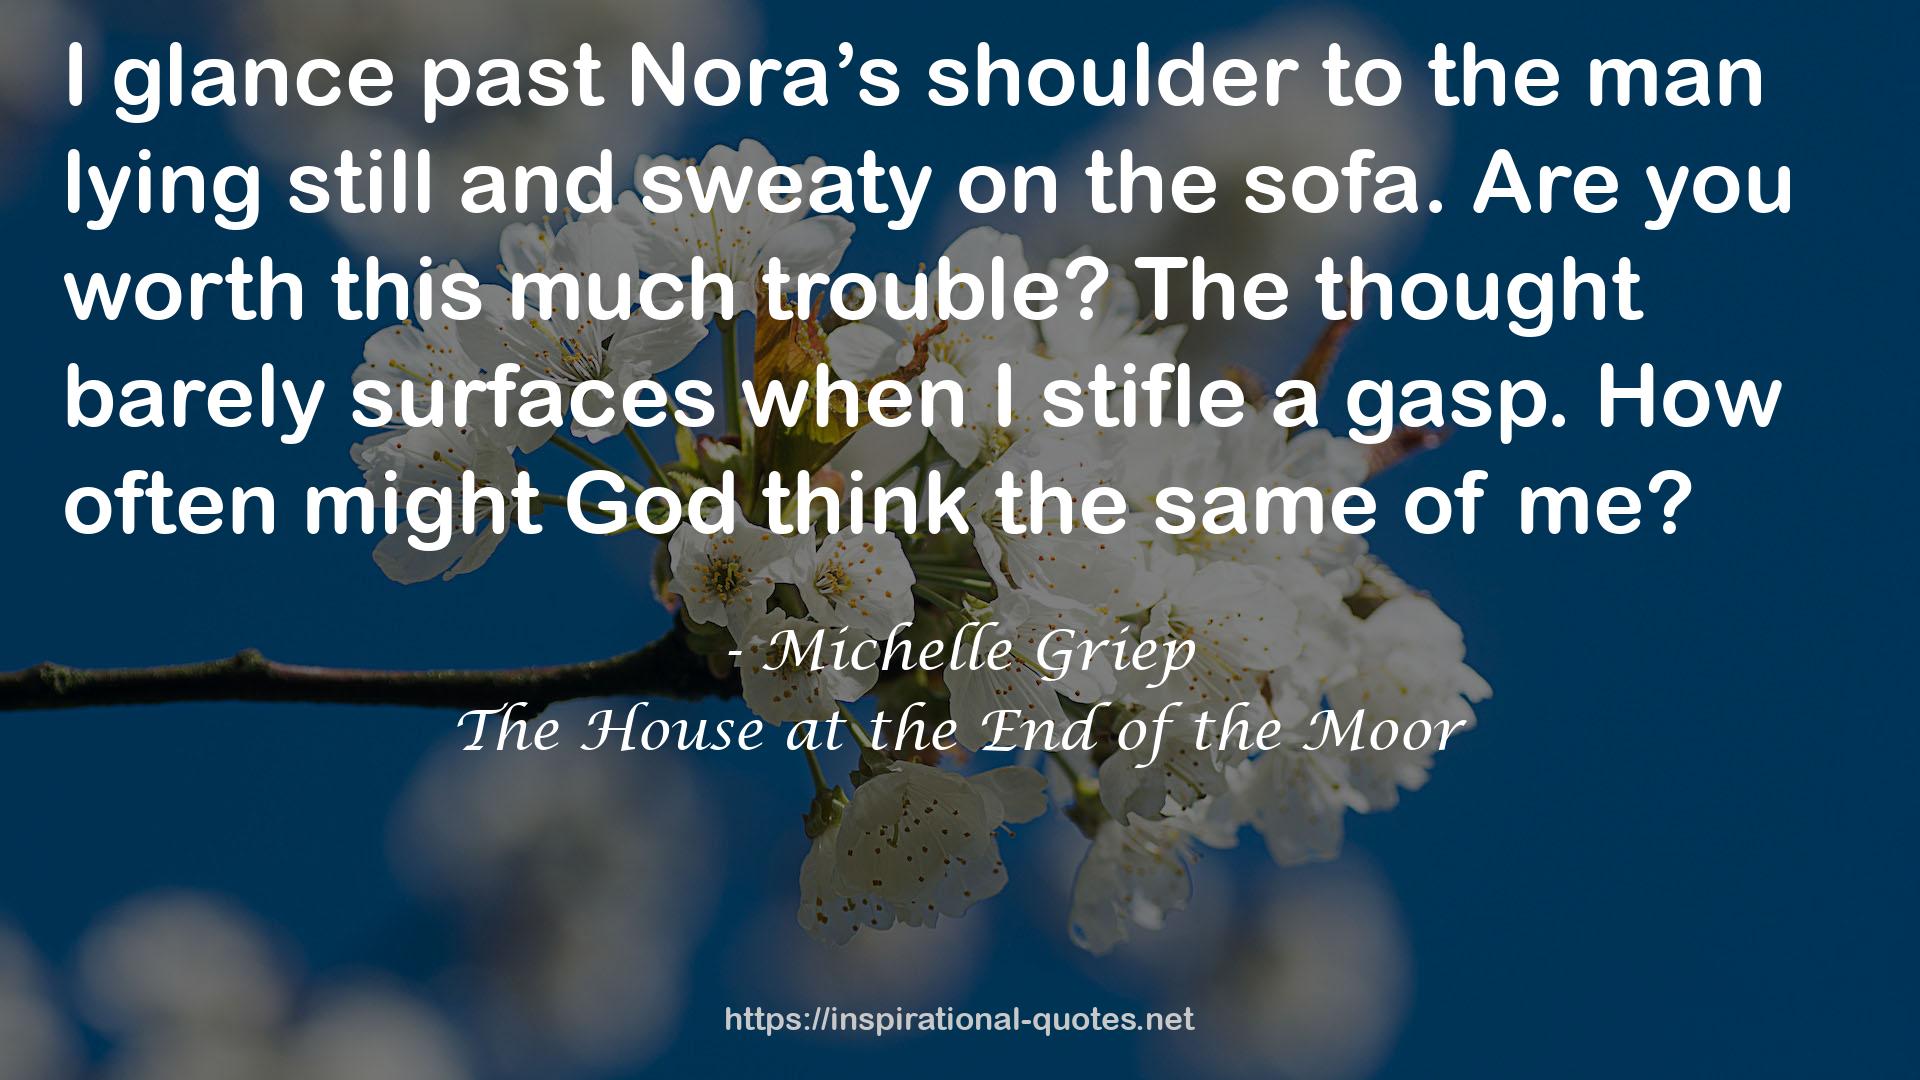 The House at the End of the Moor QUOTES